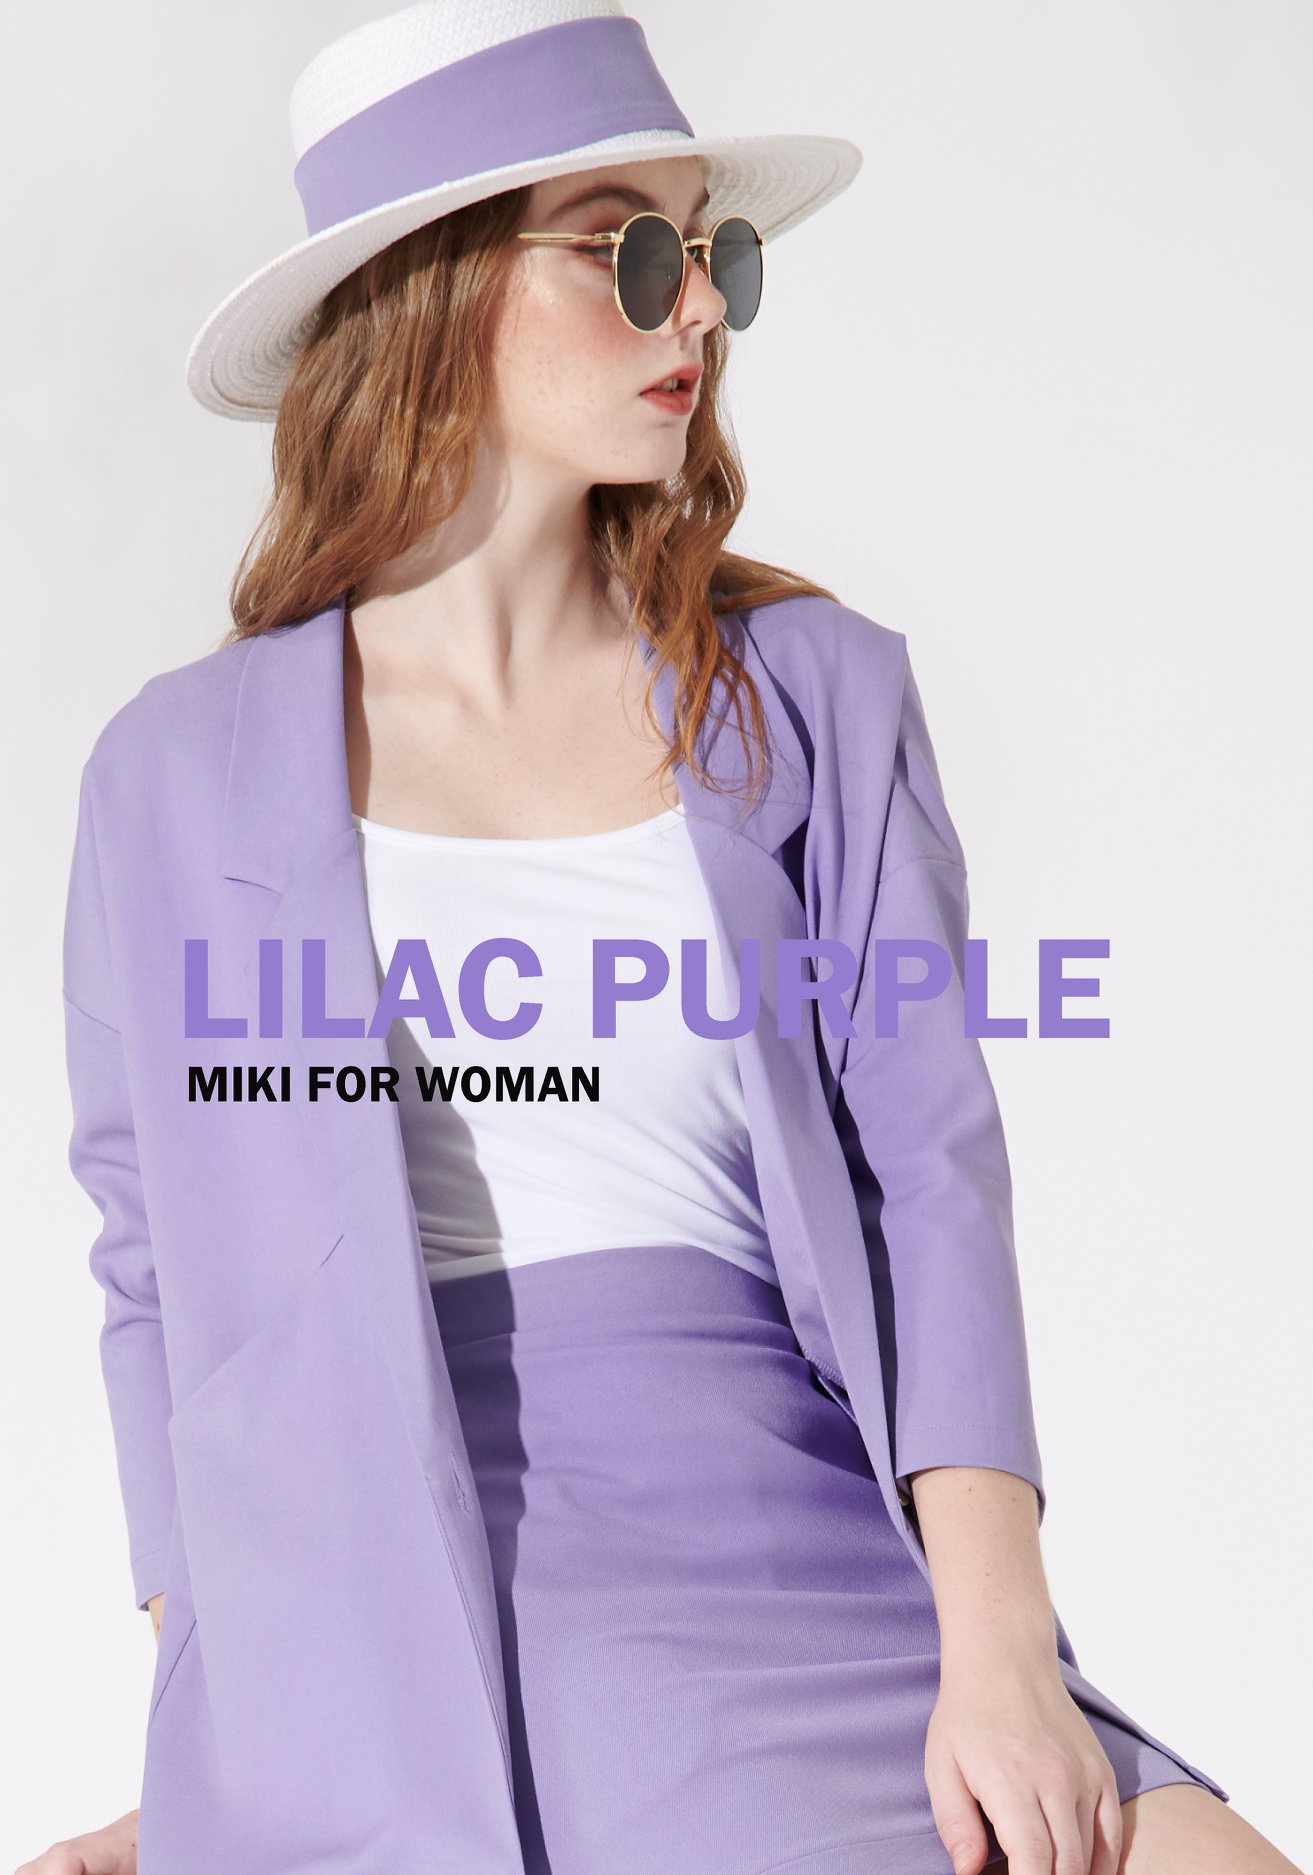 MIKI FOR WOMAN – LILAC PURPLE